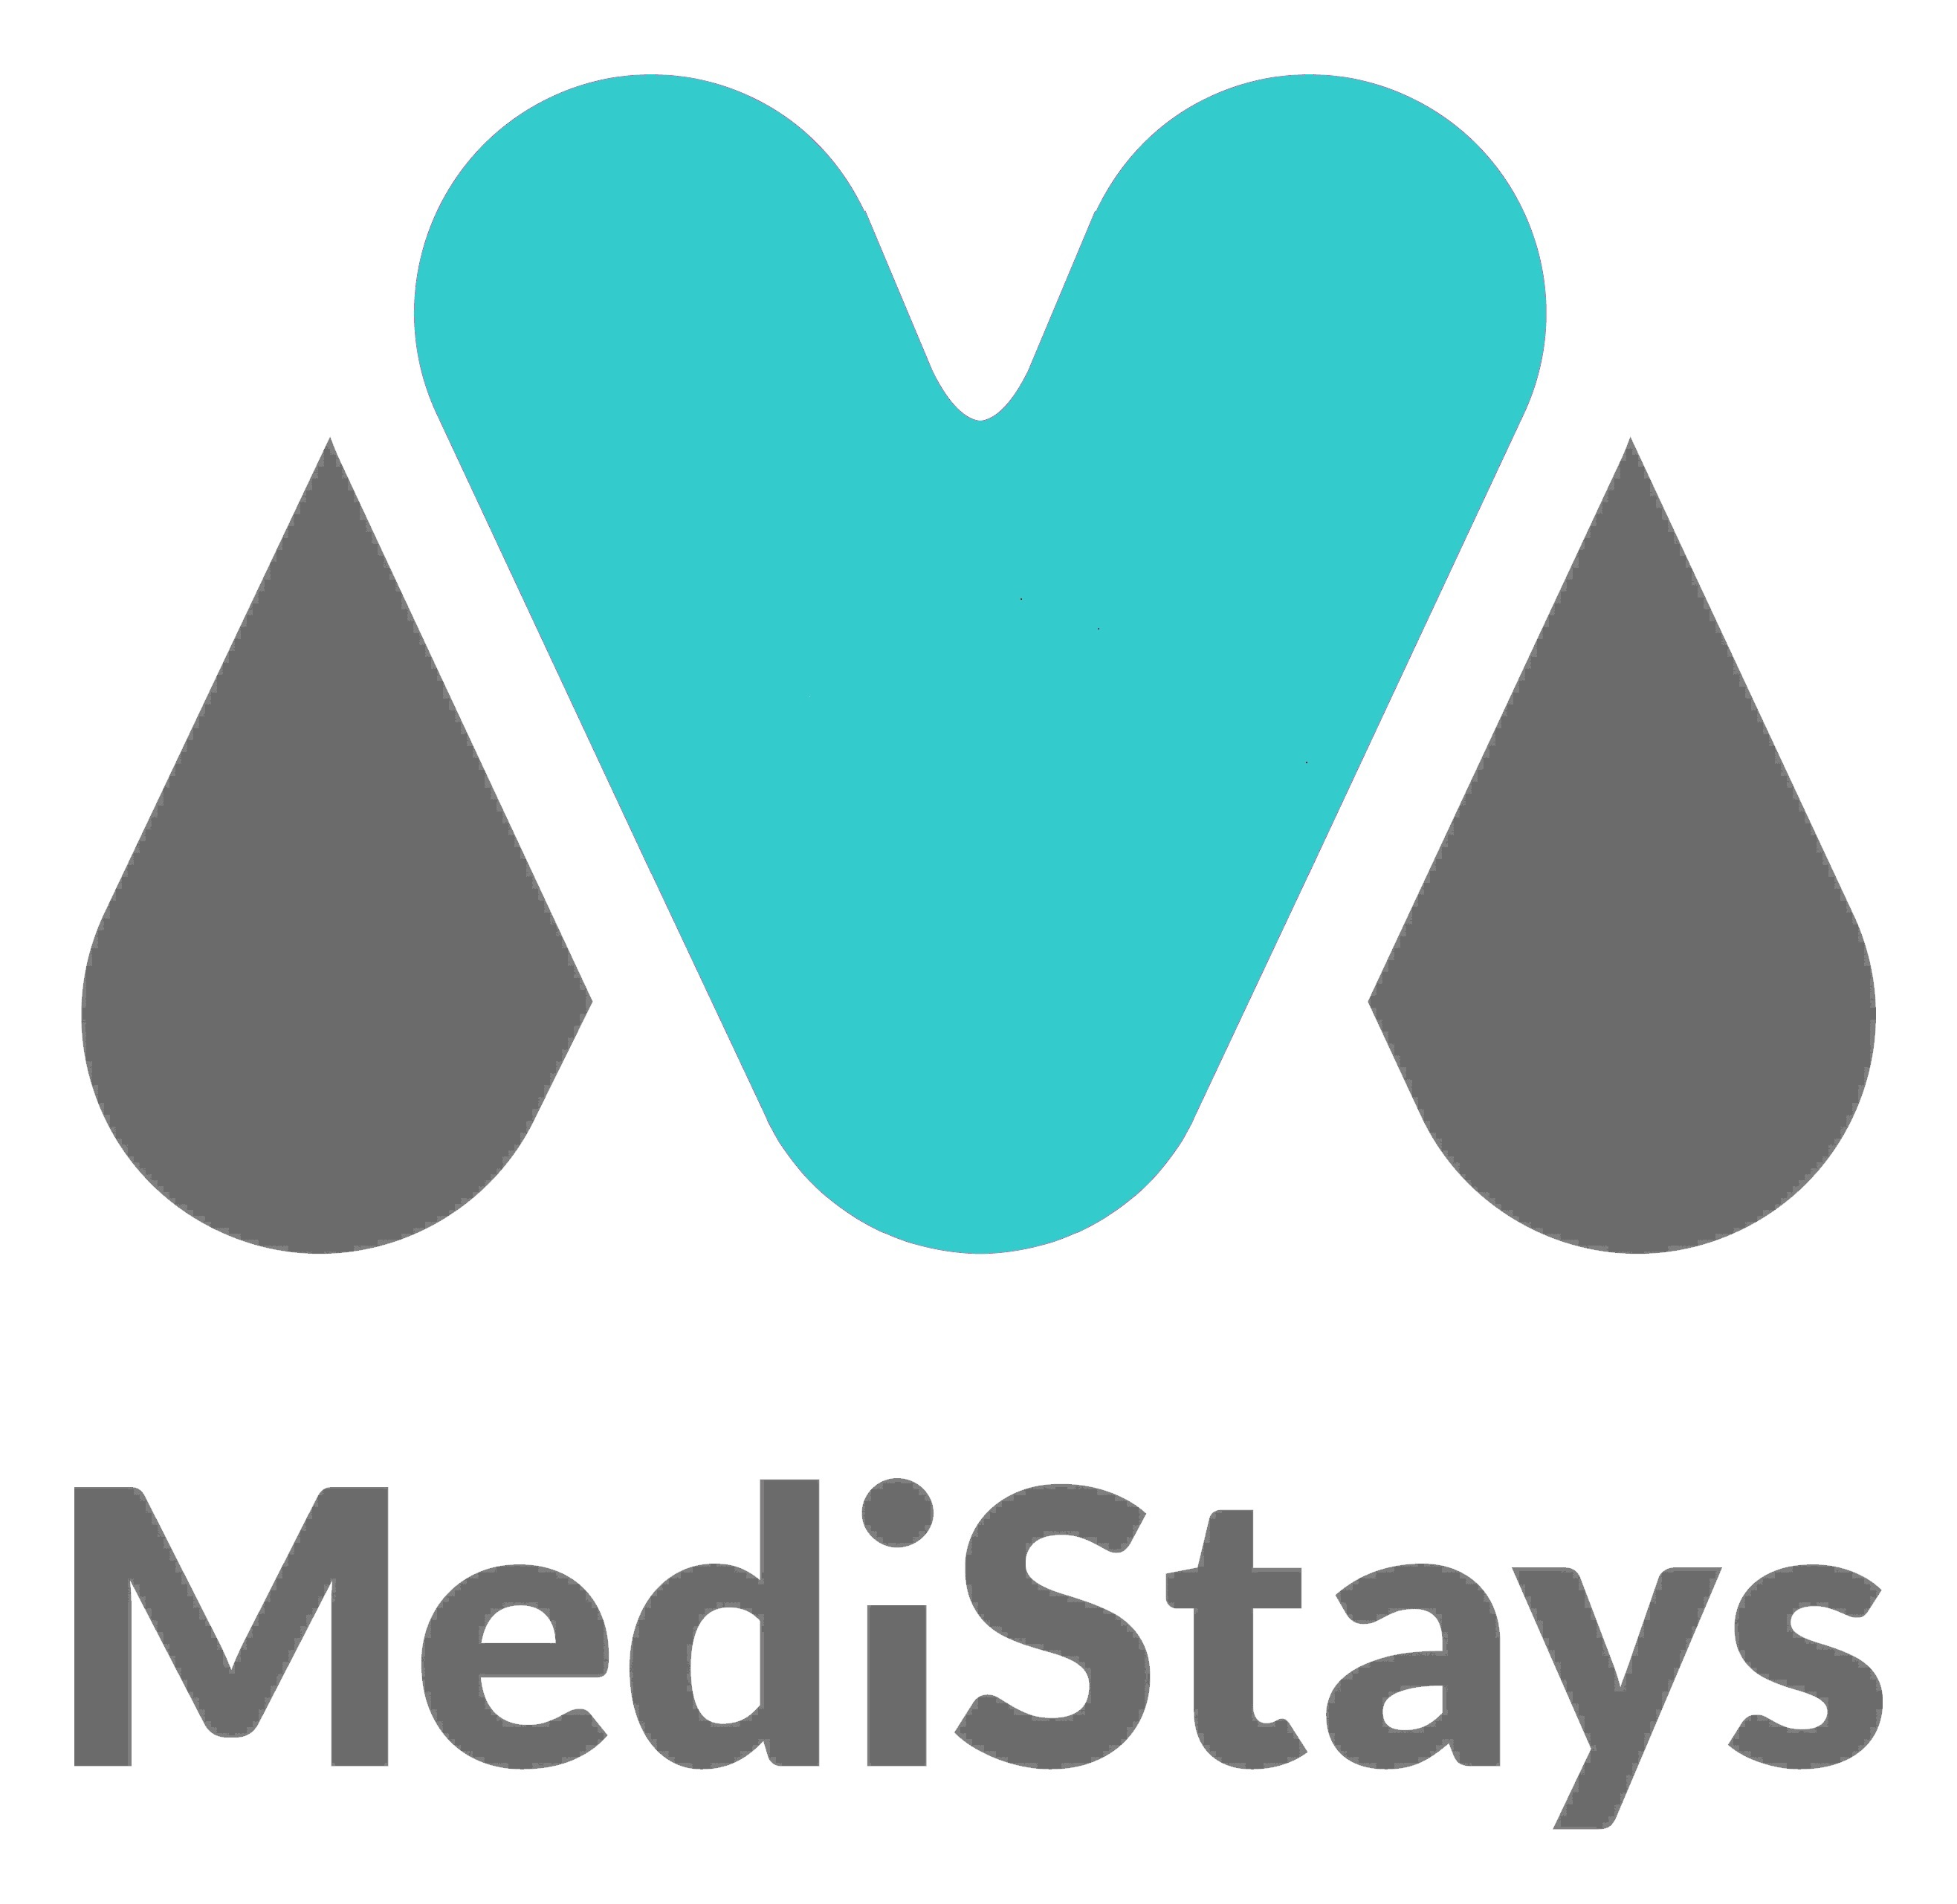 Logo of MediStays featuring a large cyan heart shape flanked by two dark gray droplets, with "MediStays" written below in gray lettering.